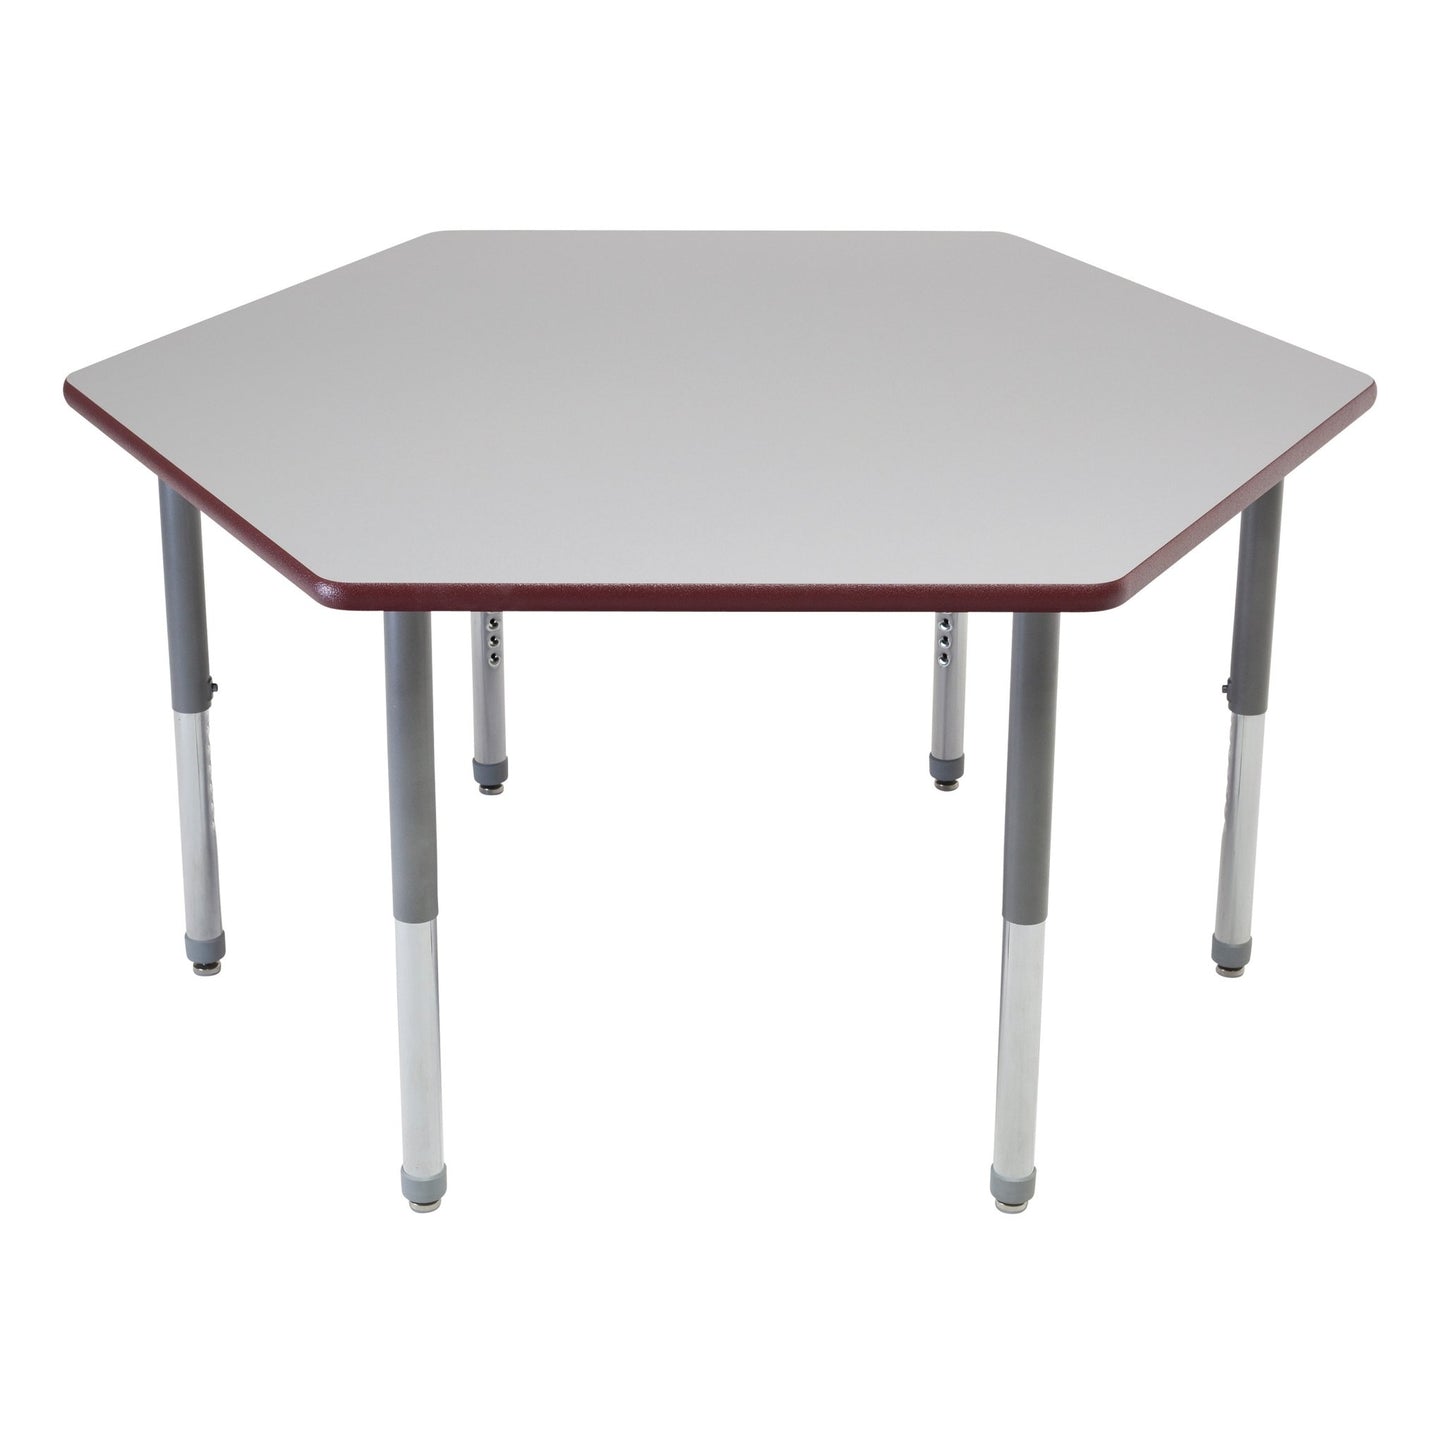 AmTab Multi-Functional Collaborative Activity Table - Genesis Collection - Hexagon - 60"W x 60"L (AmTab AMT-AHX60D) - SchoolOutlet